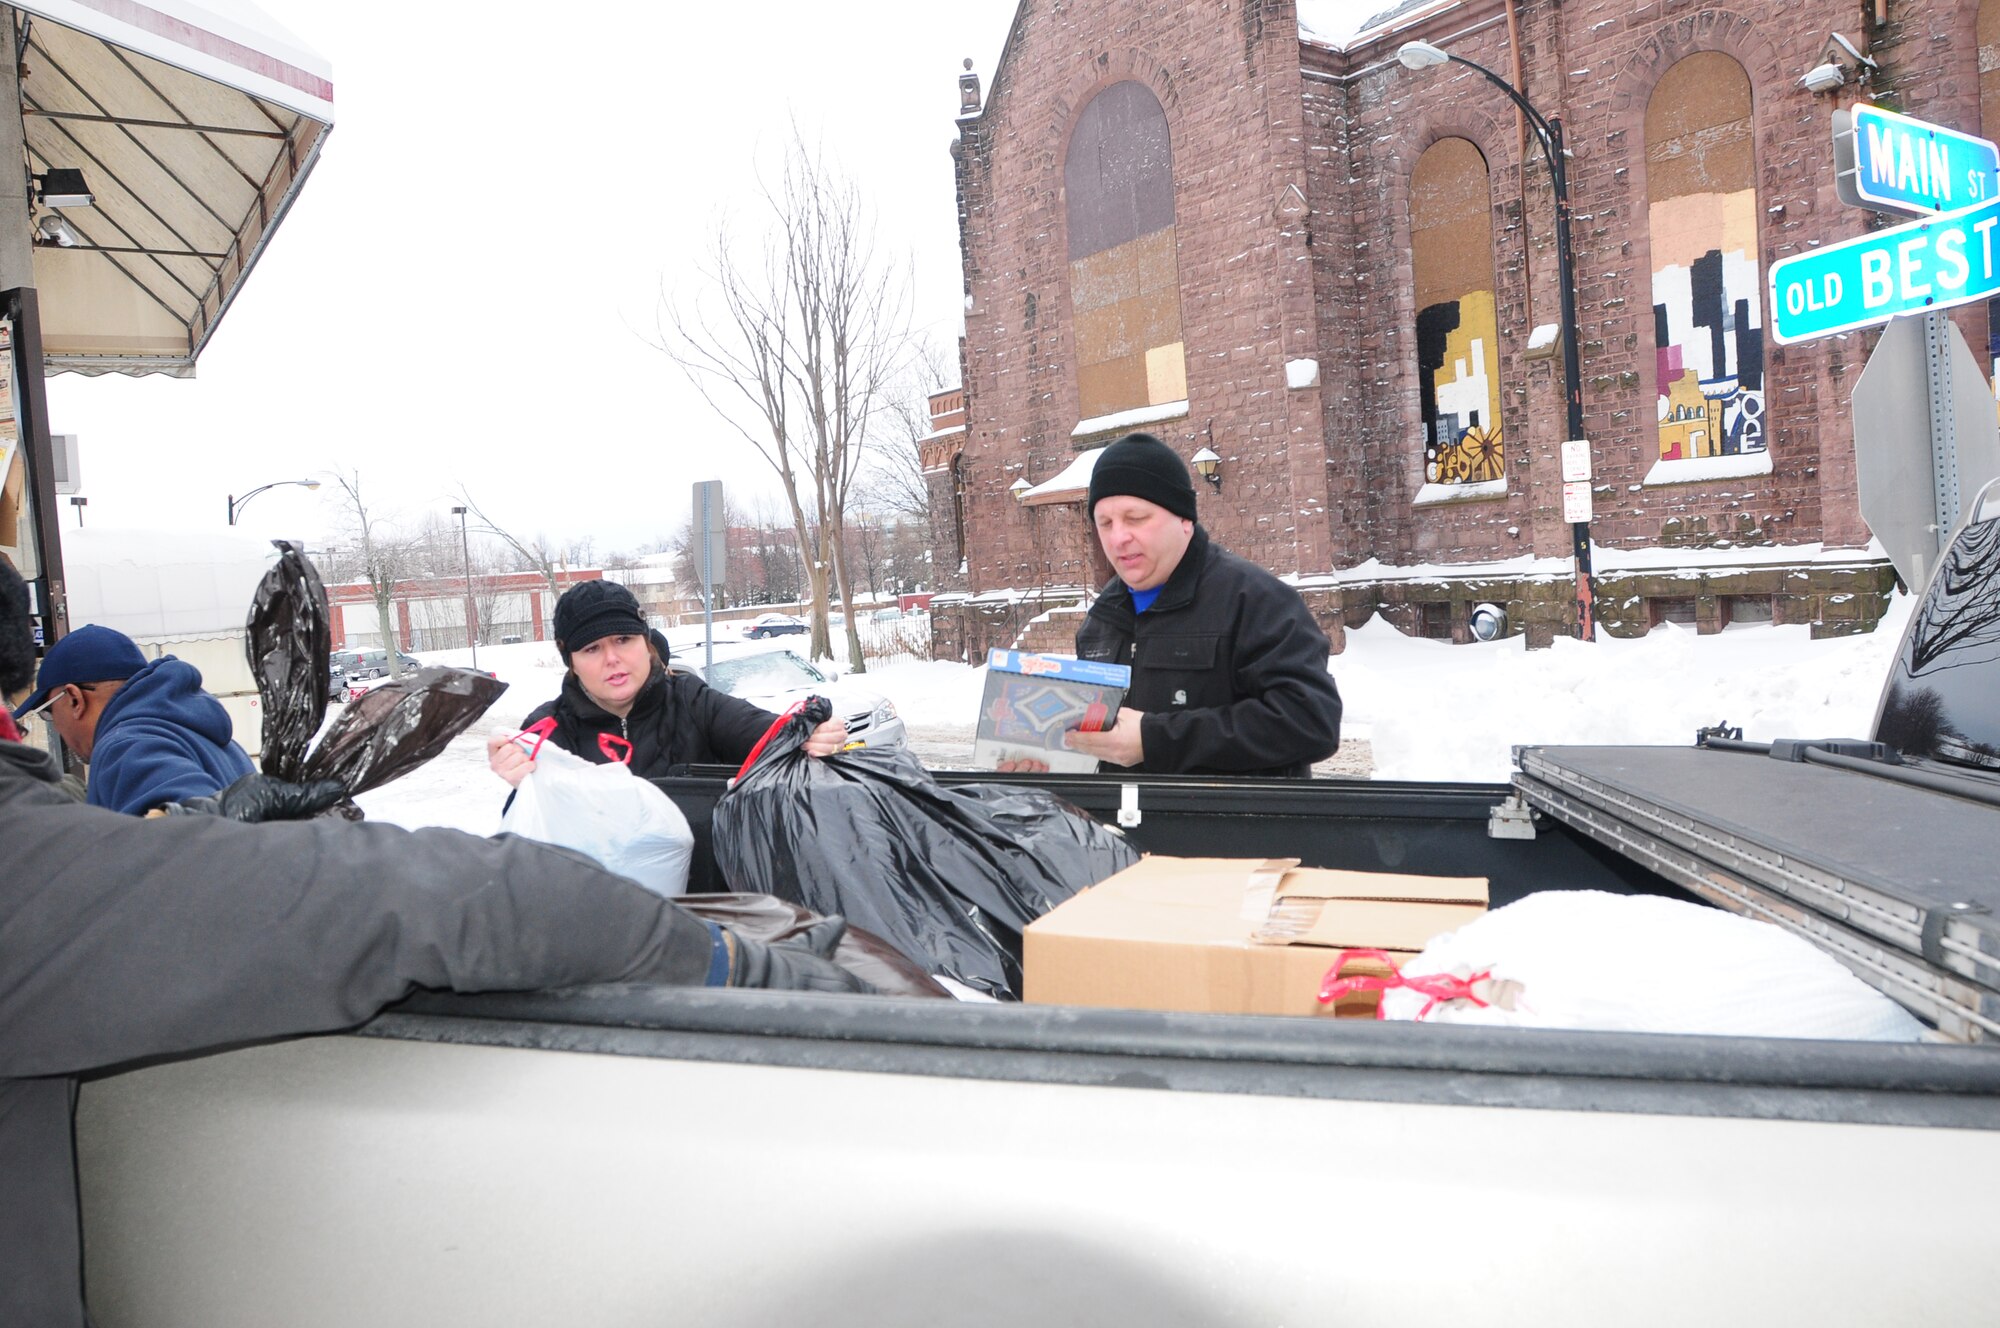 Master Sgt. Melissa Shenefiel and Master Sgt. Kenneth Devole unload the donated clothing for the Western New York Veterans Housing Coalition in Buffalo, NY. on Dec. 18, 2013 (New York Air National Guard photo/Senior Master Sgt. Ray Lloyd)